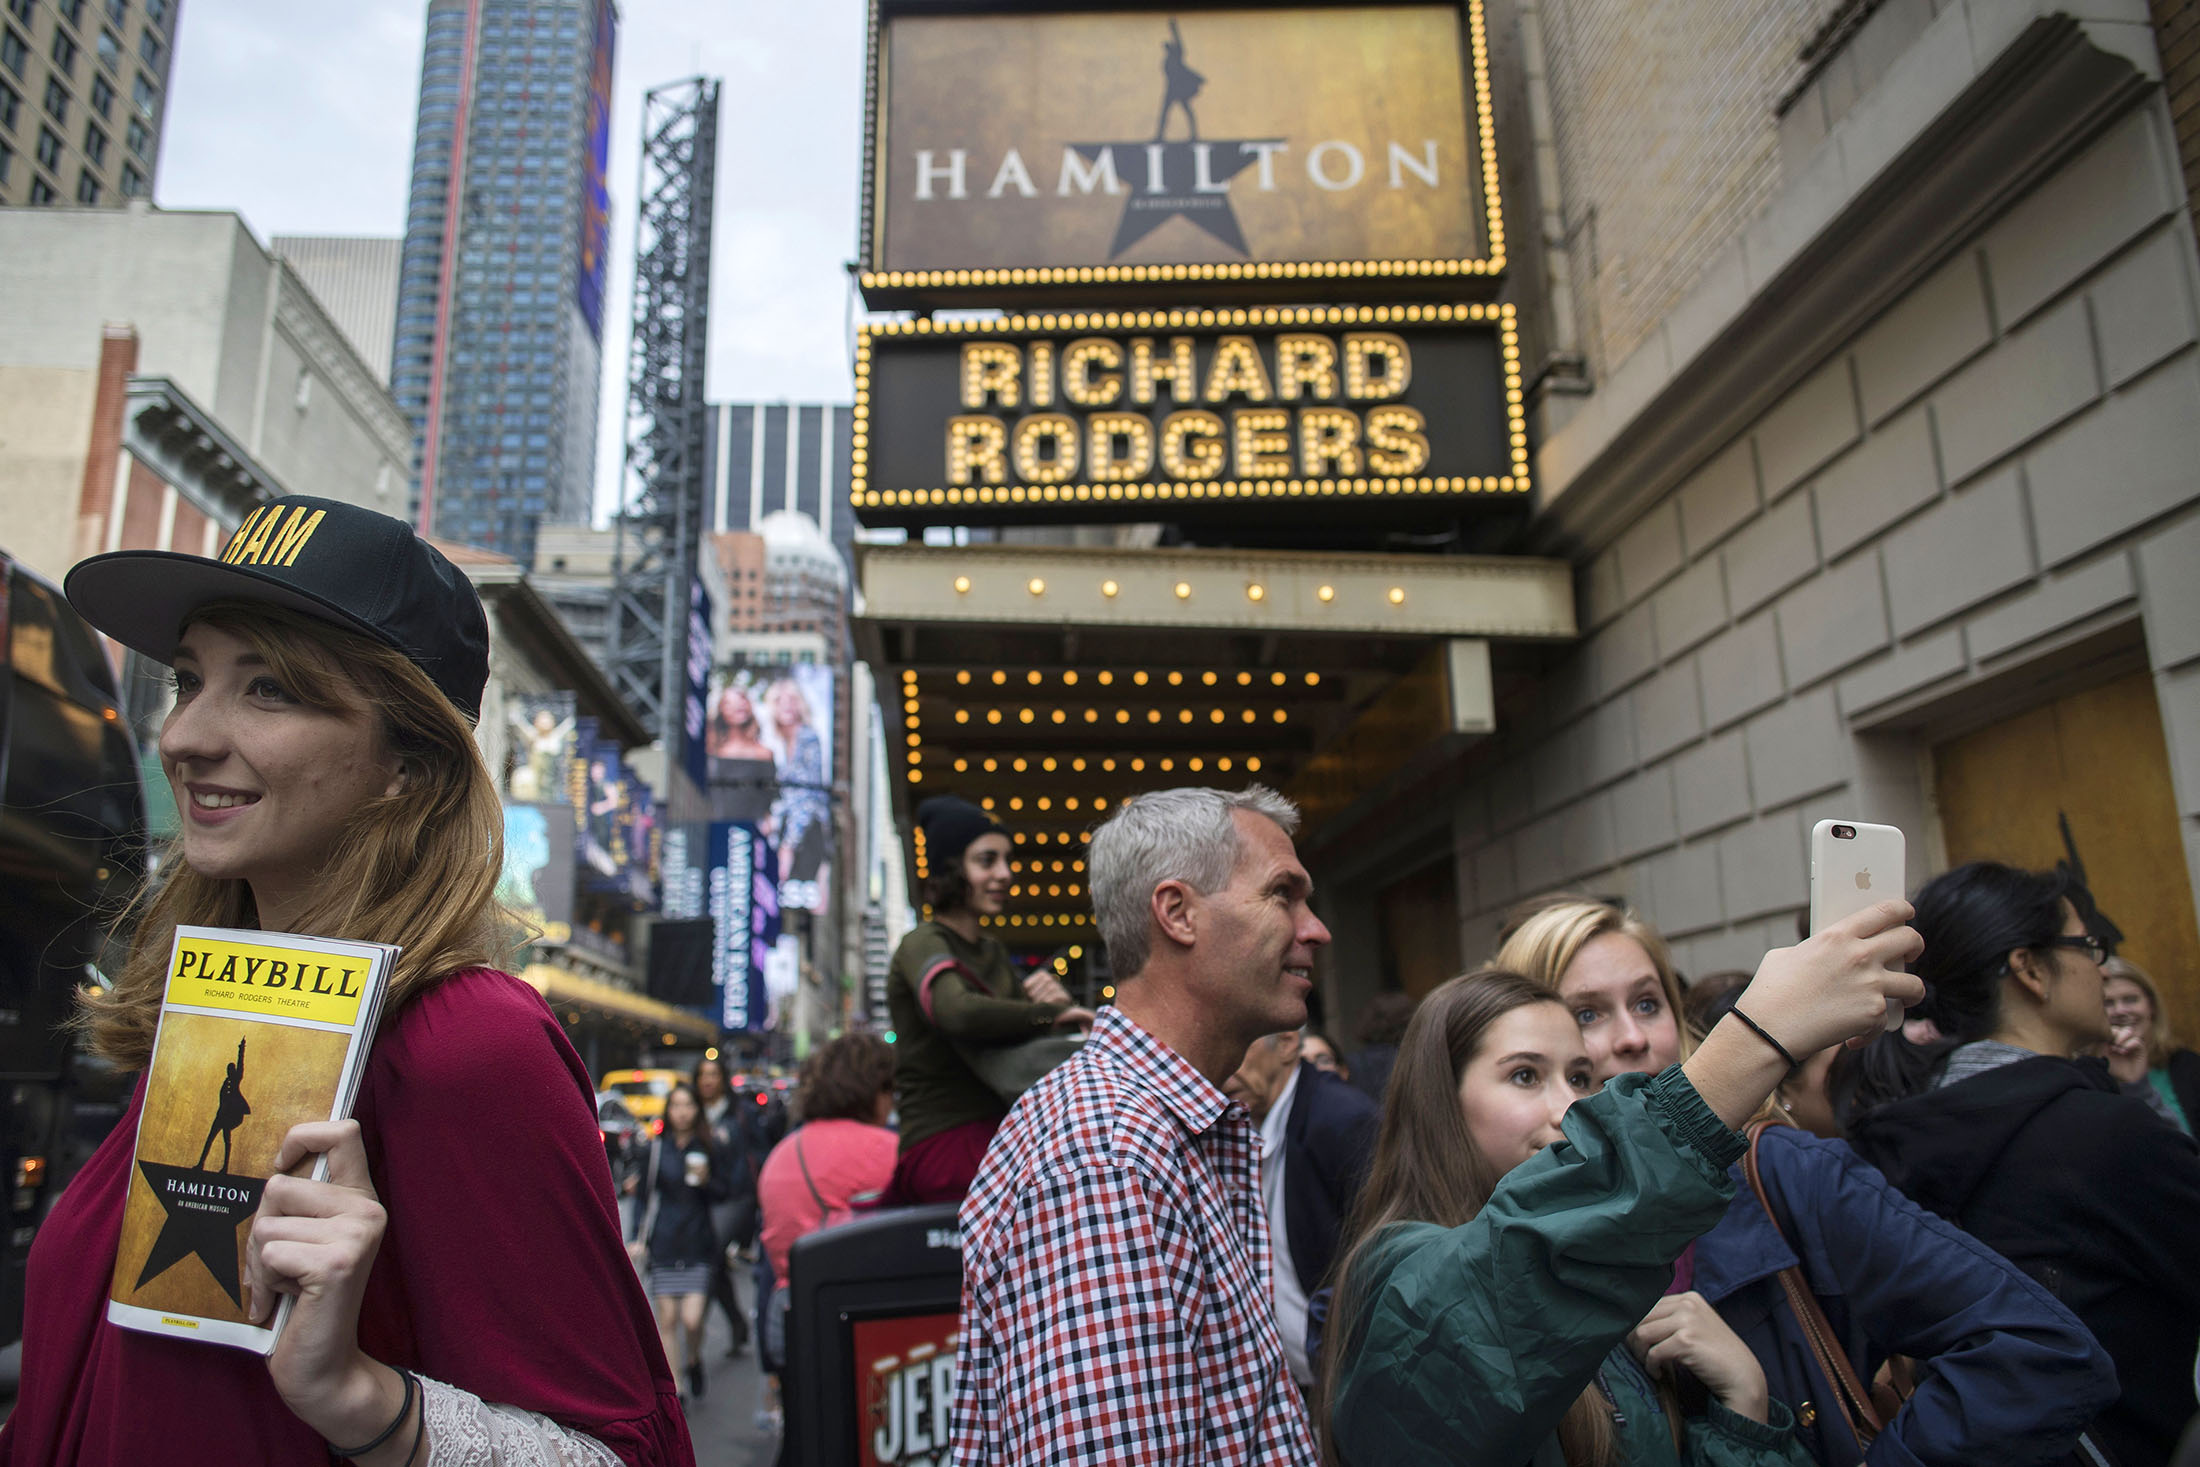 Attendees take photographs outside of the “Hamilton” musical in the Times Square area of New York on May 22.
